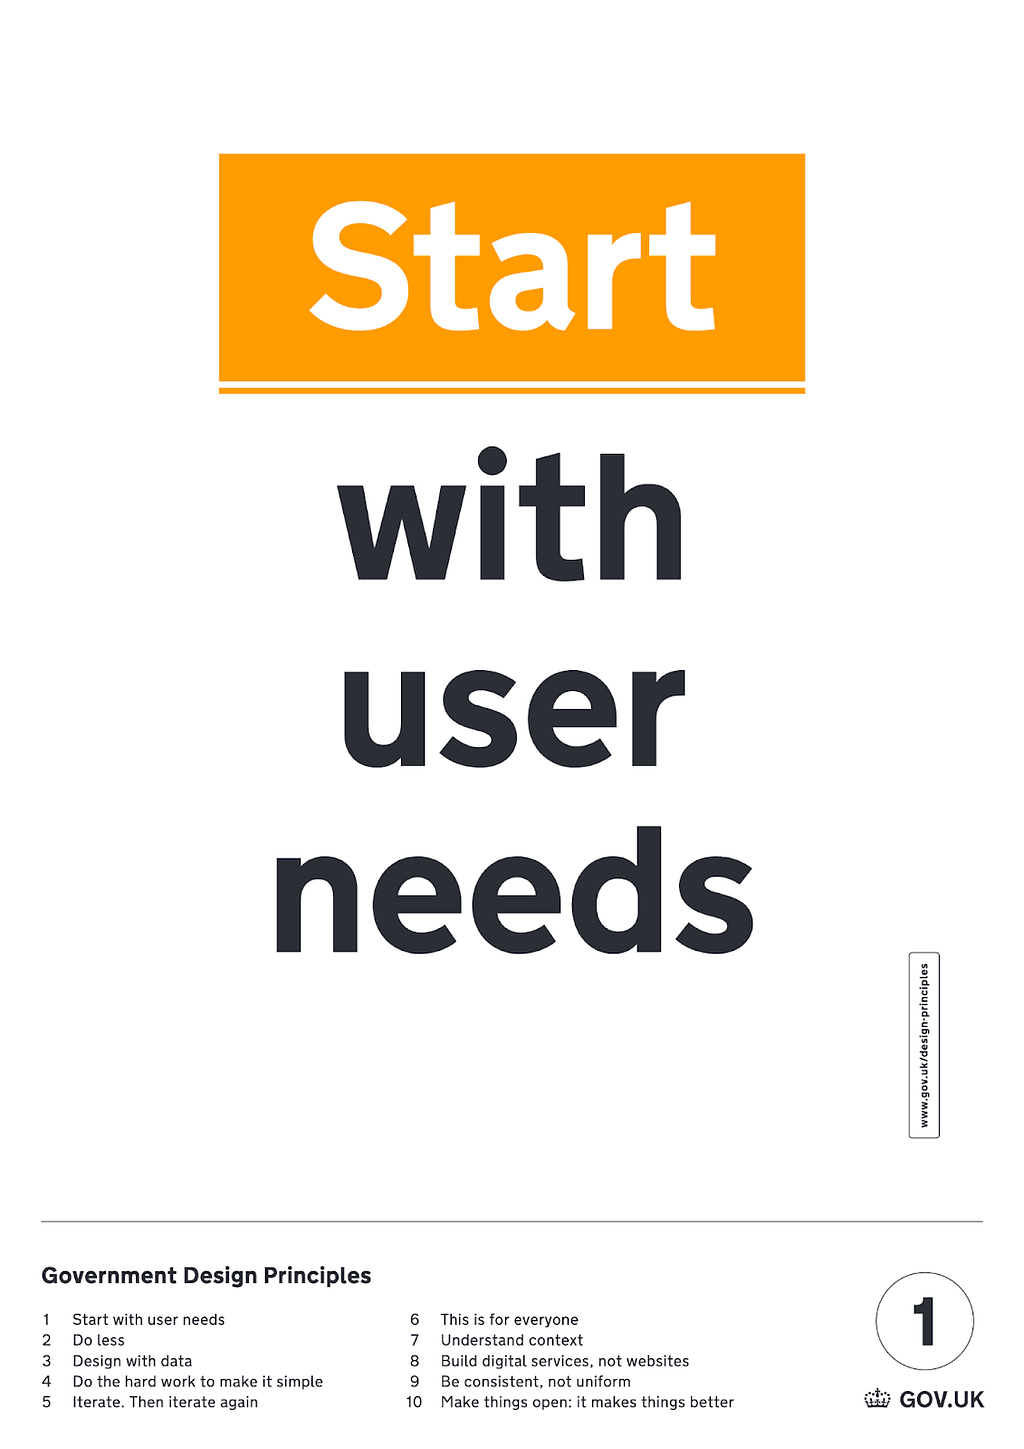 A poster of the first government design principle: Start with user needs. The poster has start with user needs written in large text and at the bottom of the poster the 10 principles are listed out.